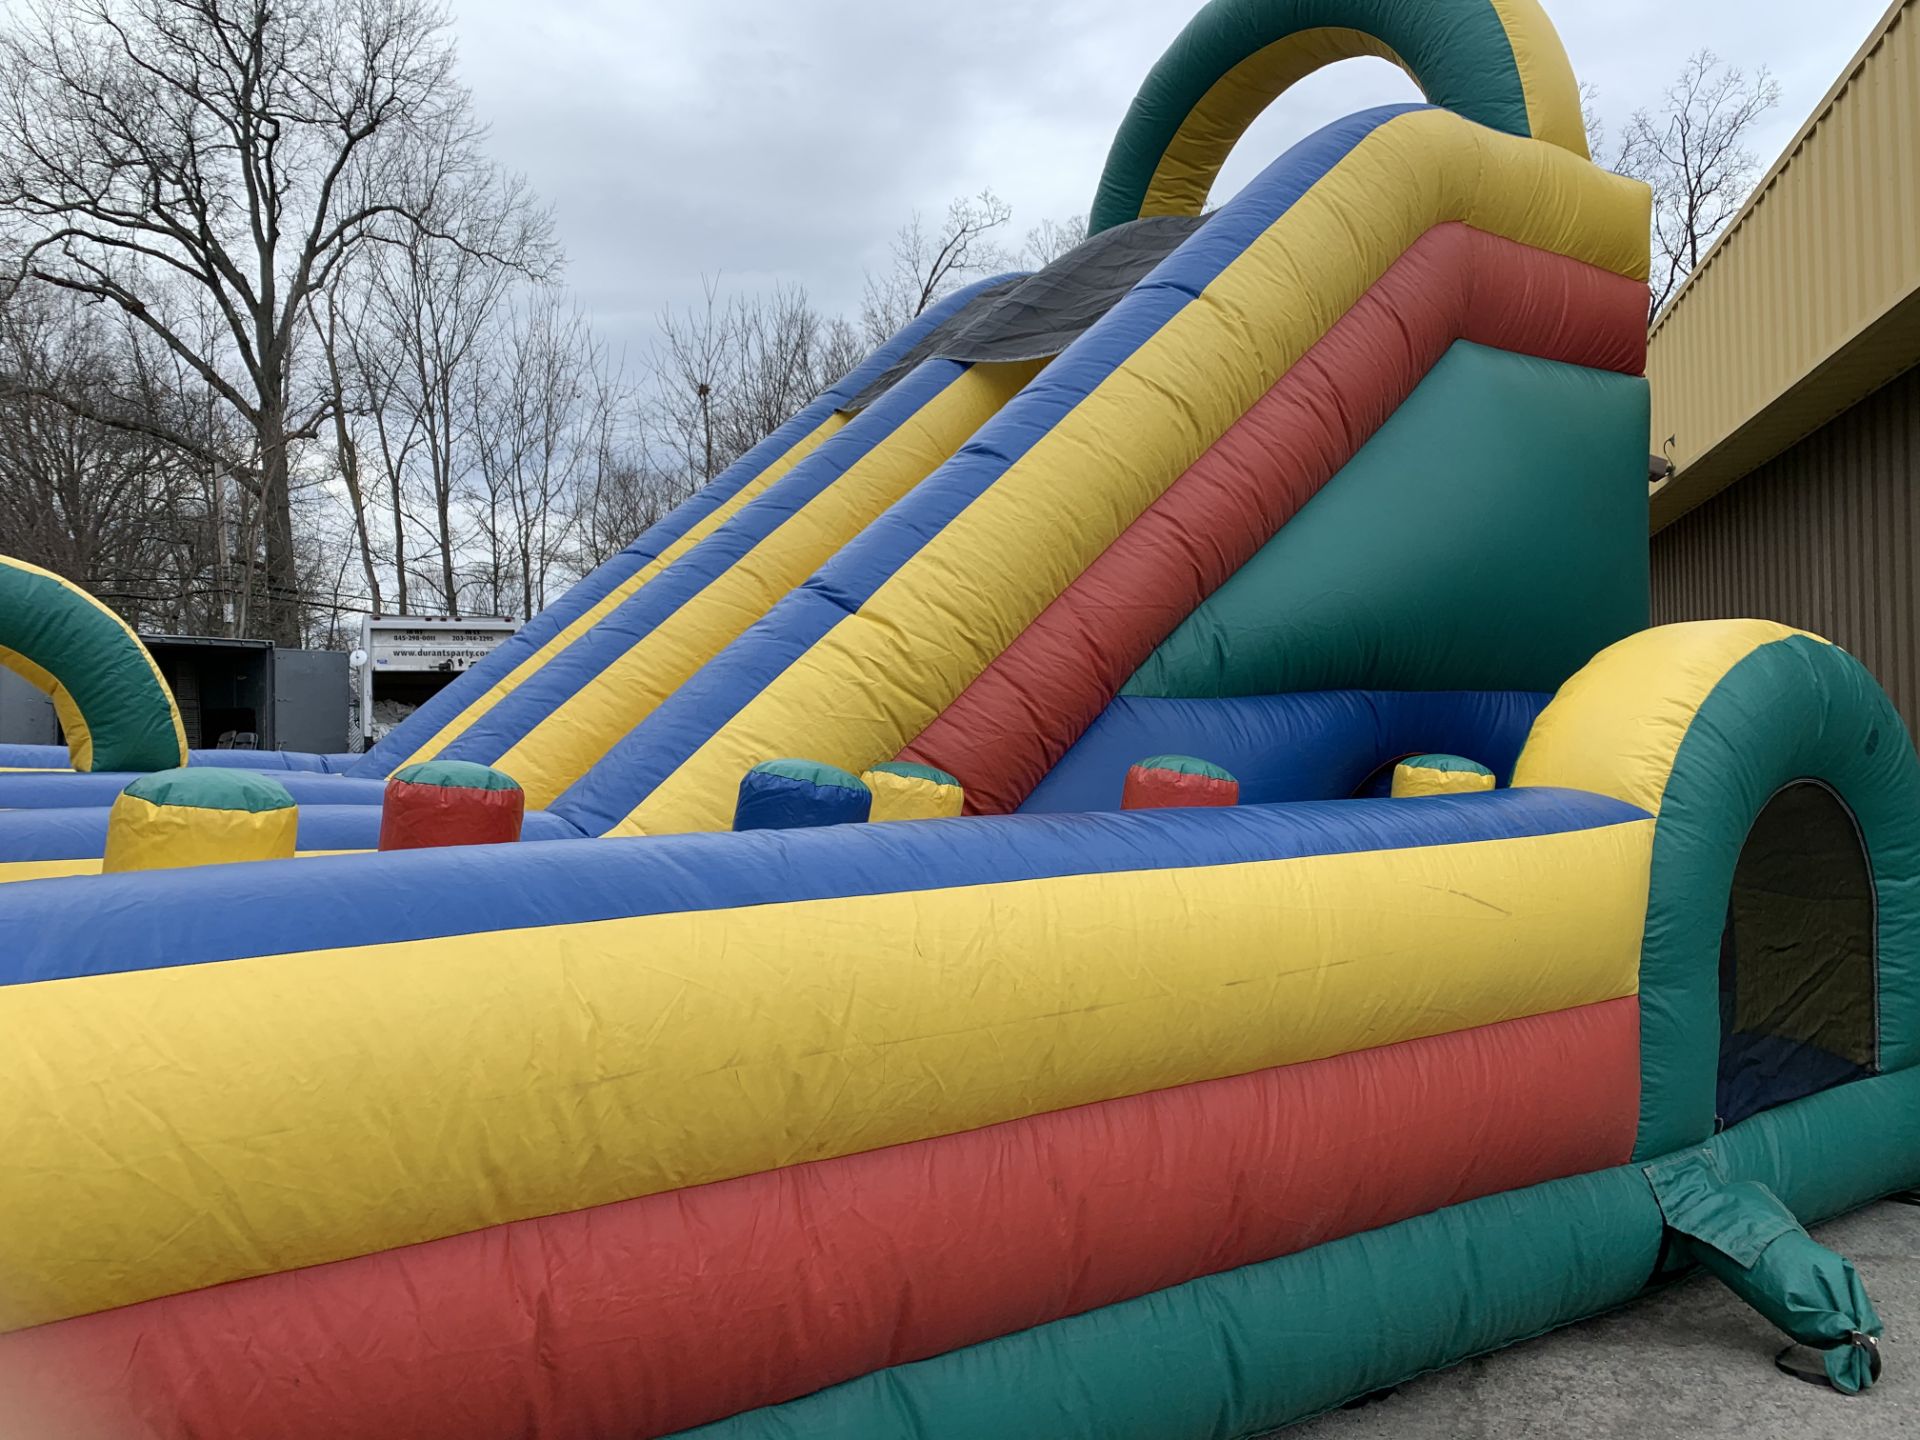 Inflatable 18 ft. slide - Image 3 of 3